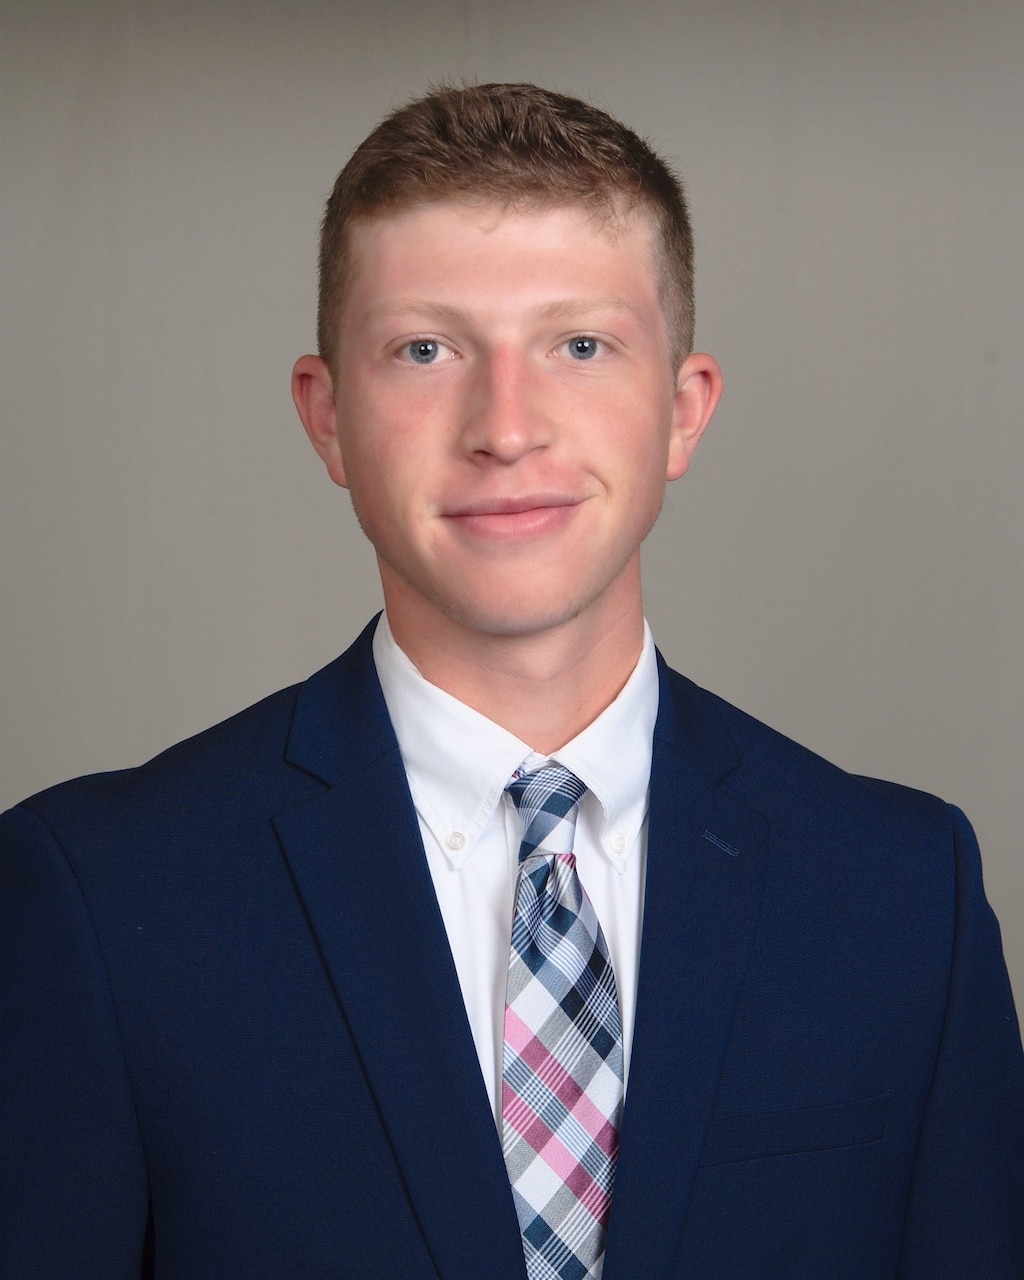 CONNOR H. MICHAEL  Your Financial Professional & Insurance Agent